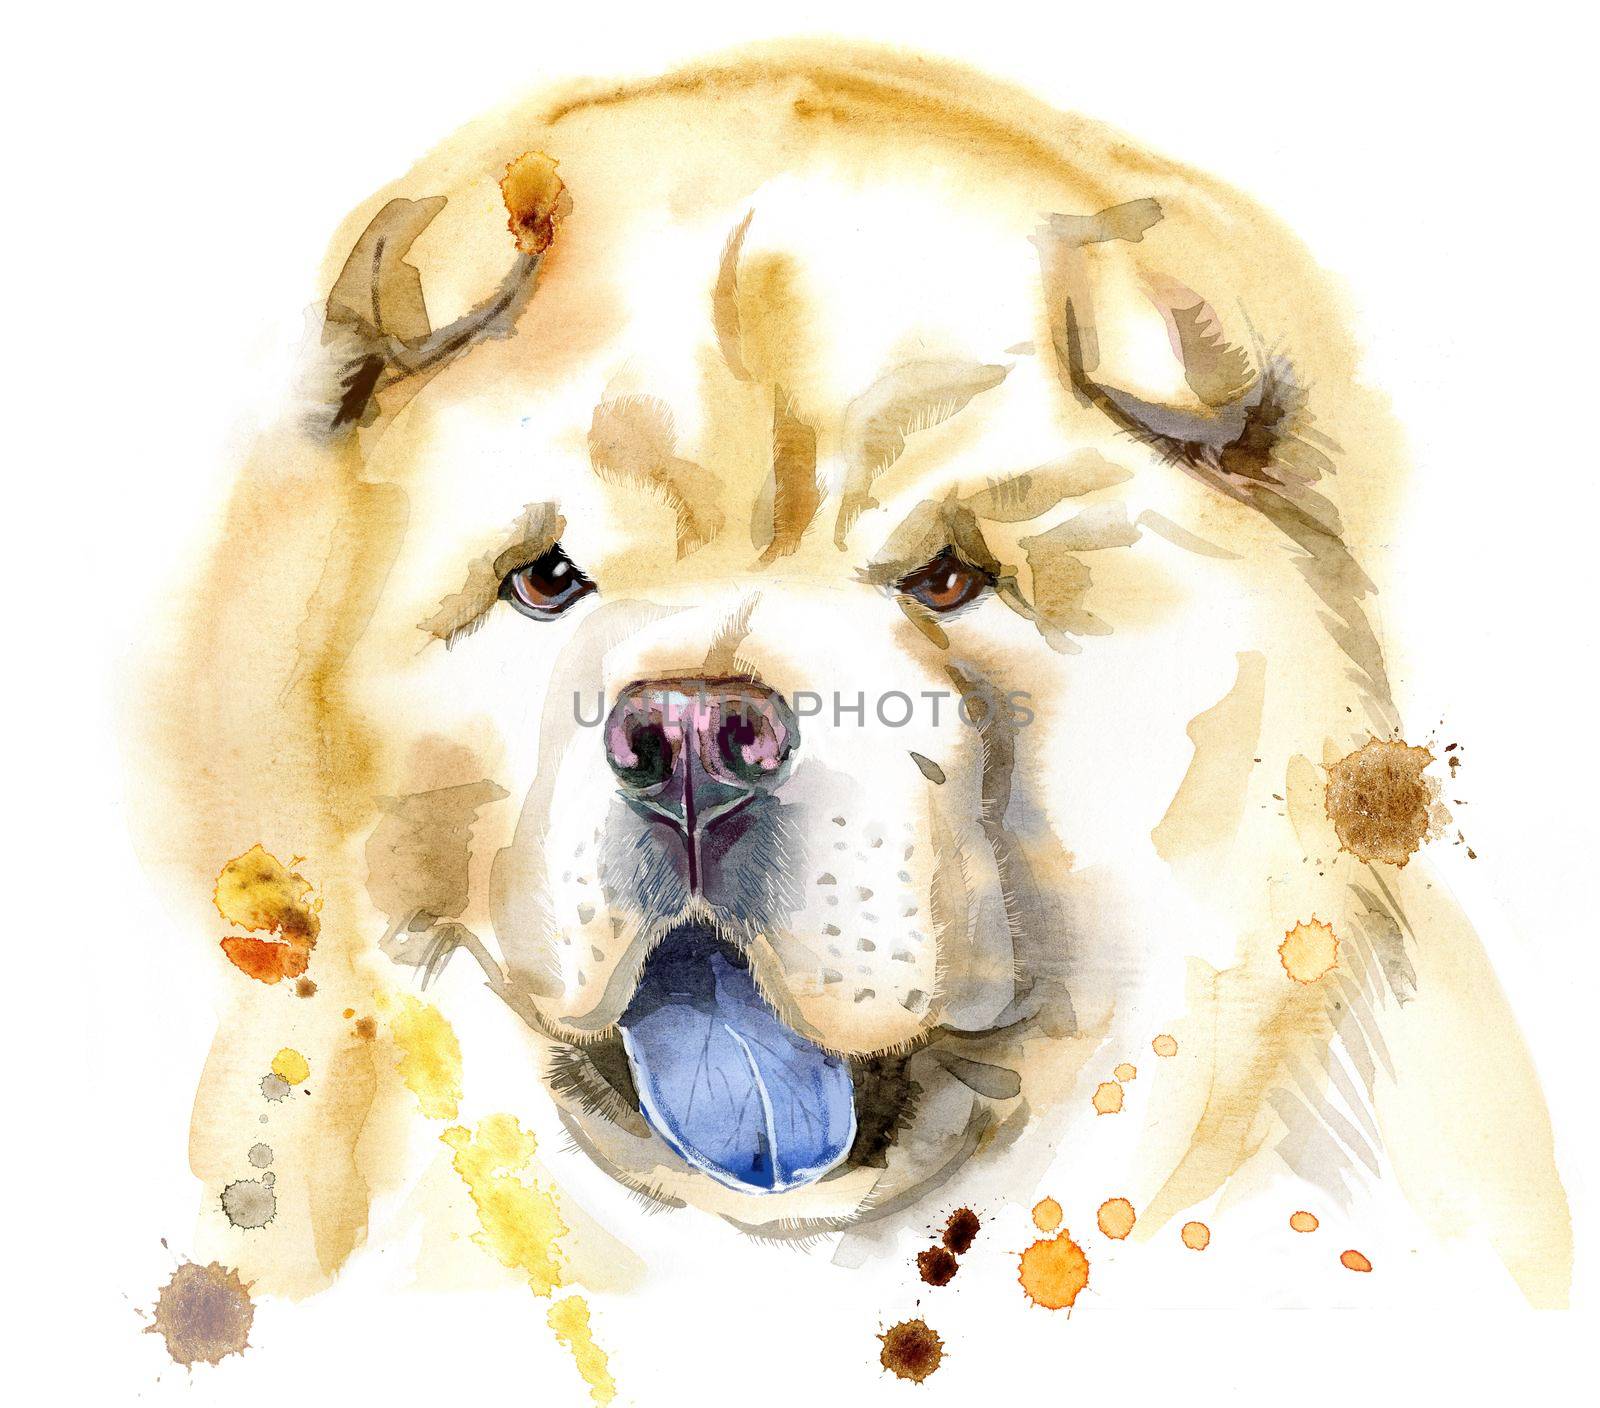 Cute Dog. Dog T-shirt graphics. watercolor chow-chow dog illustration